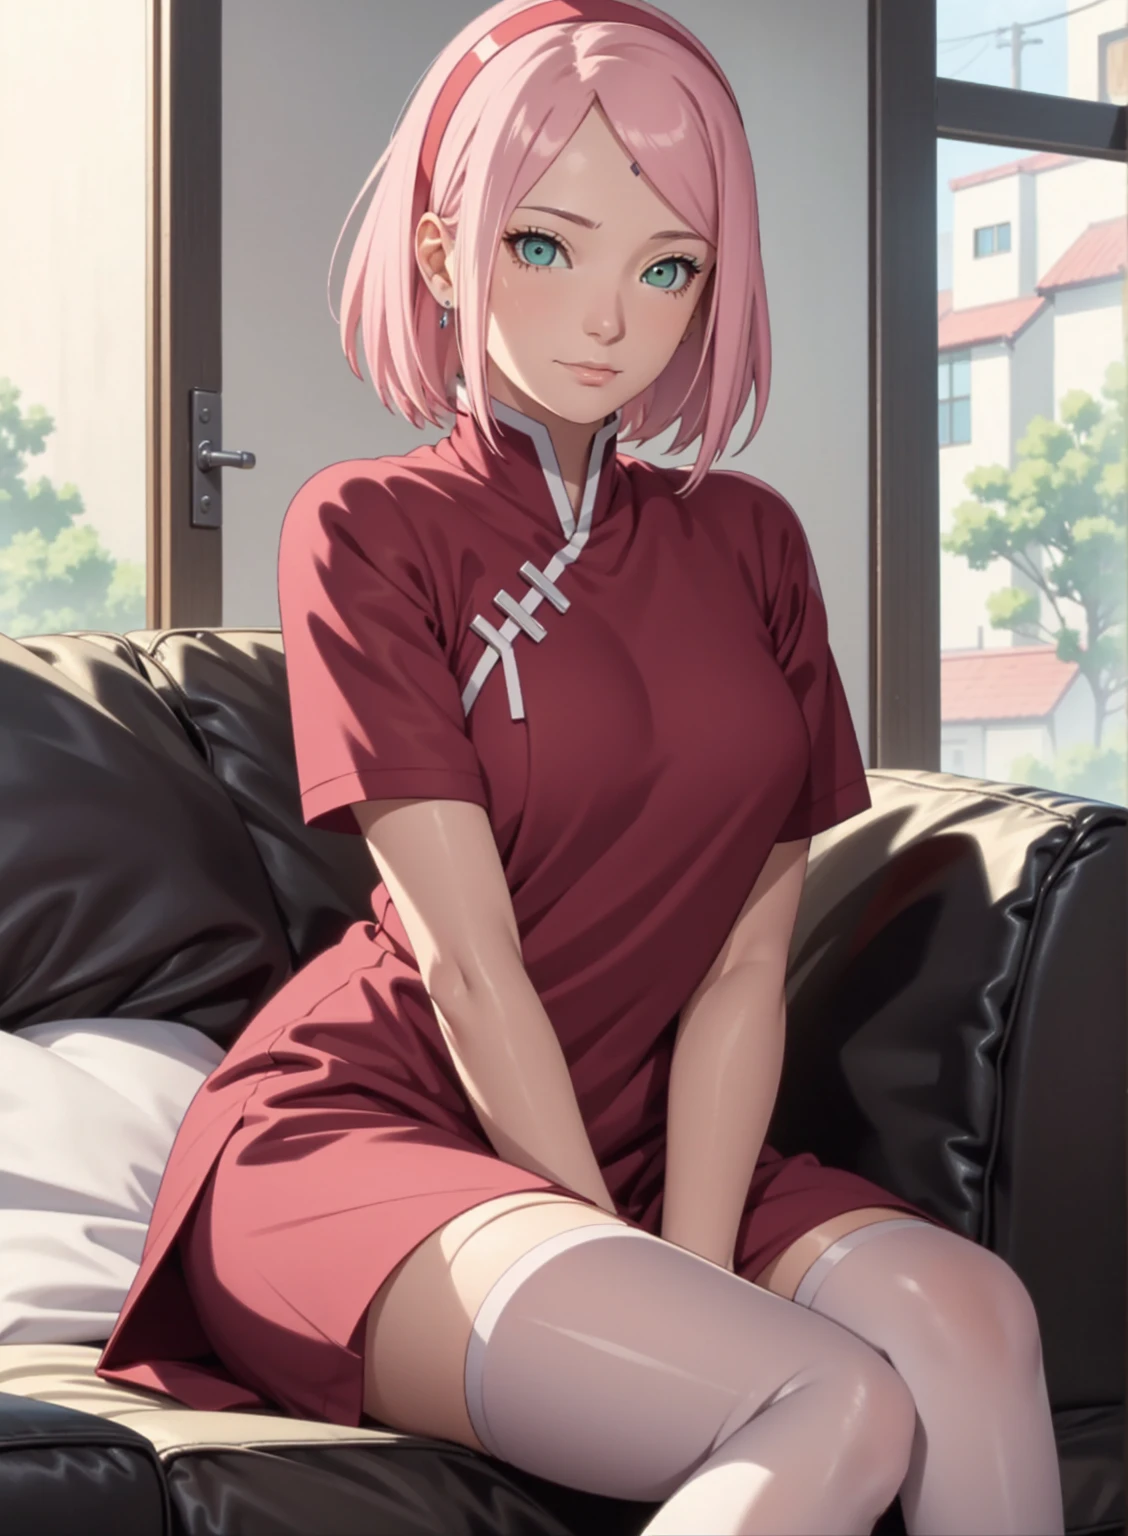 film movie still、1girl in、It's standing、24 years、pale-skinned、innocent smiles、white stockings、((A detailed face))、(Detailed skin)、Moist with intricate details、Shallow depth of field、[volume fog、shot at 8k resolution、Sakura Haruno, A pink-haired,short detailed hair, Red headband, red dress, Green eyes，Close-up, whole body, sitting on the sofa